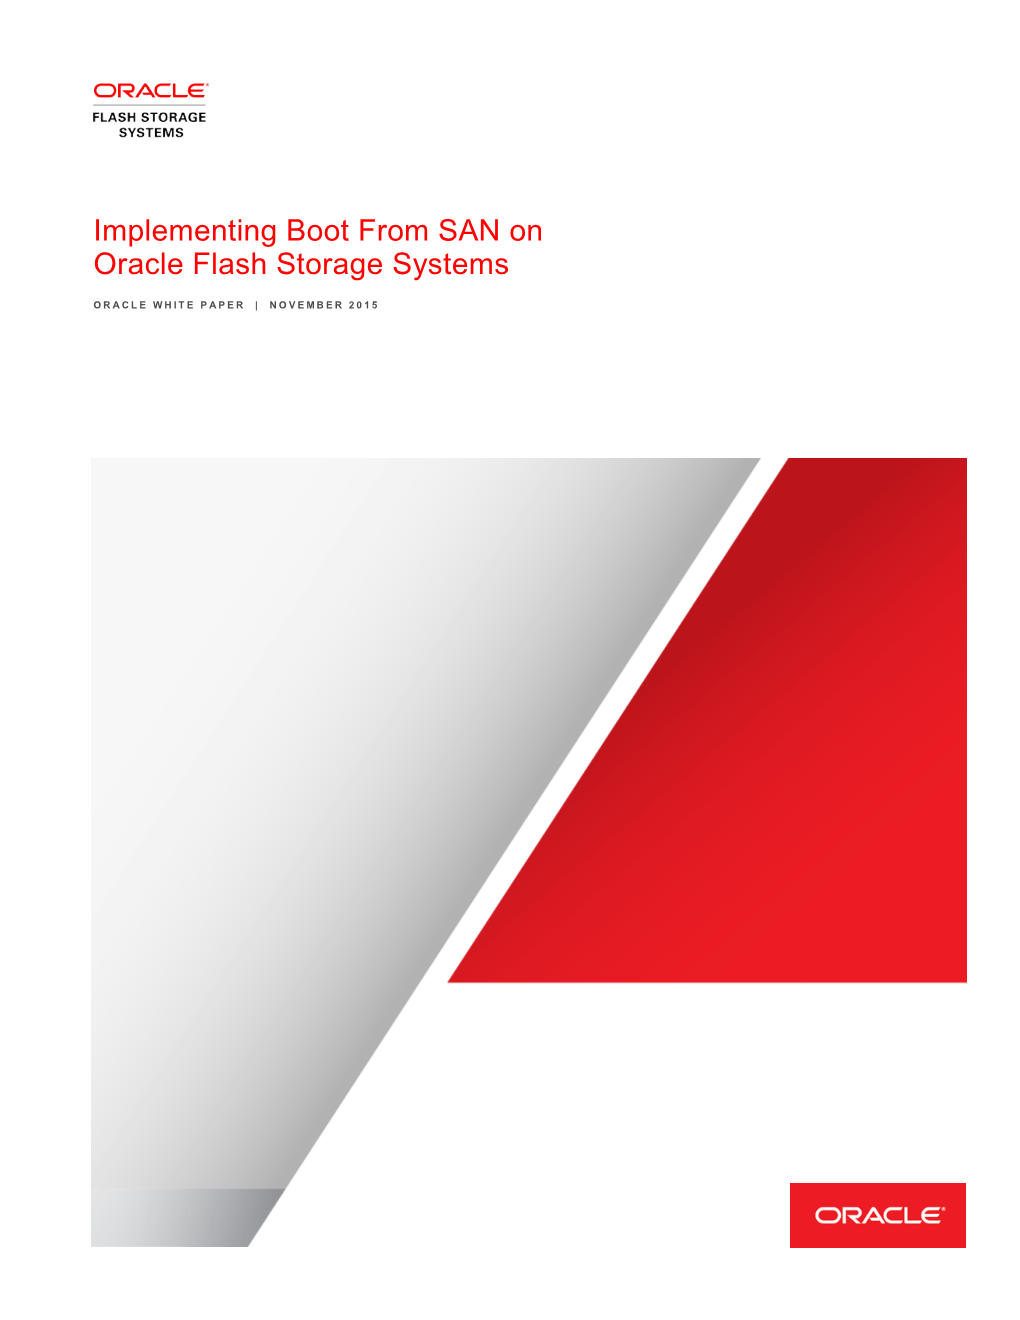 Implementing Boot from SAN on Oracle Flash Storage Systems